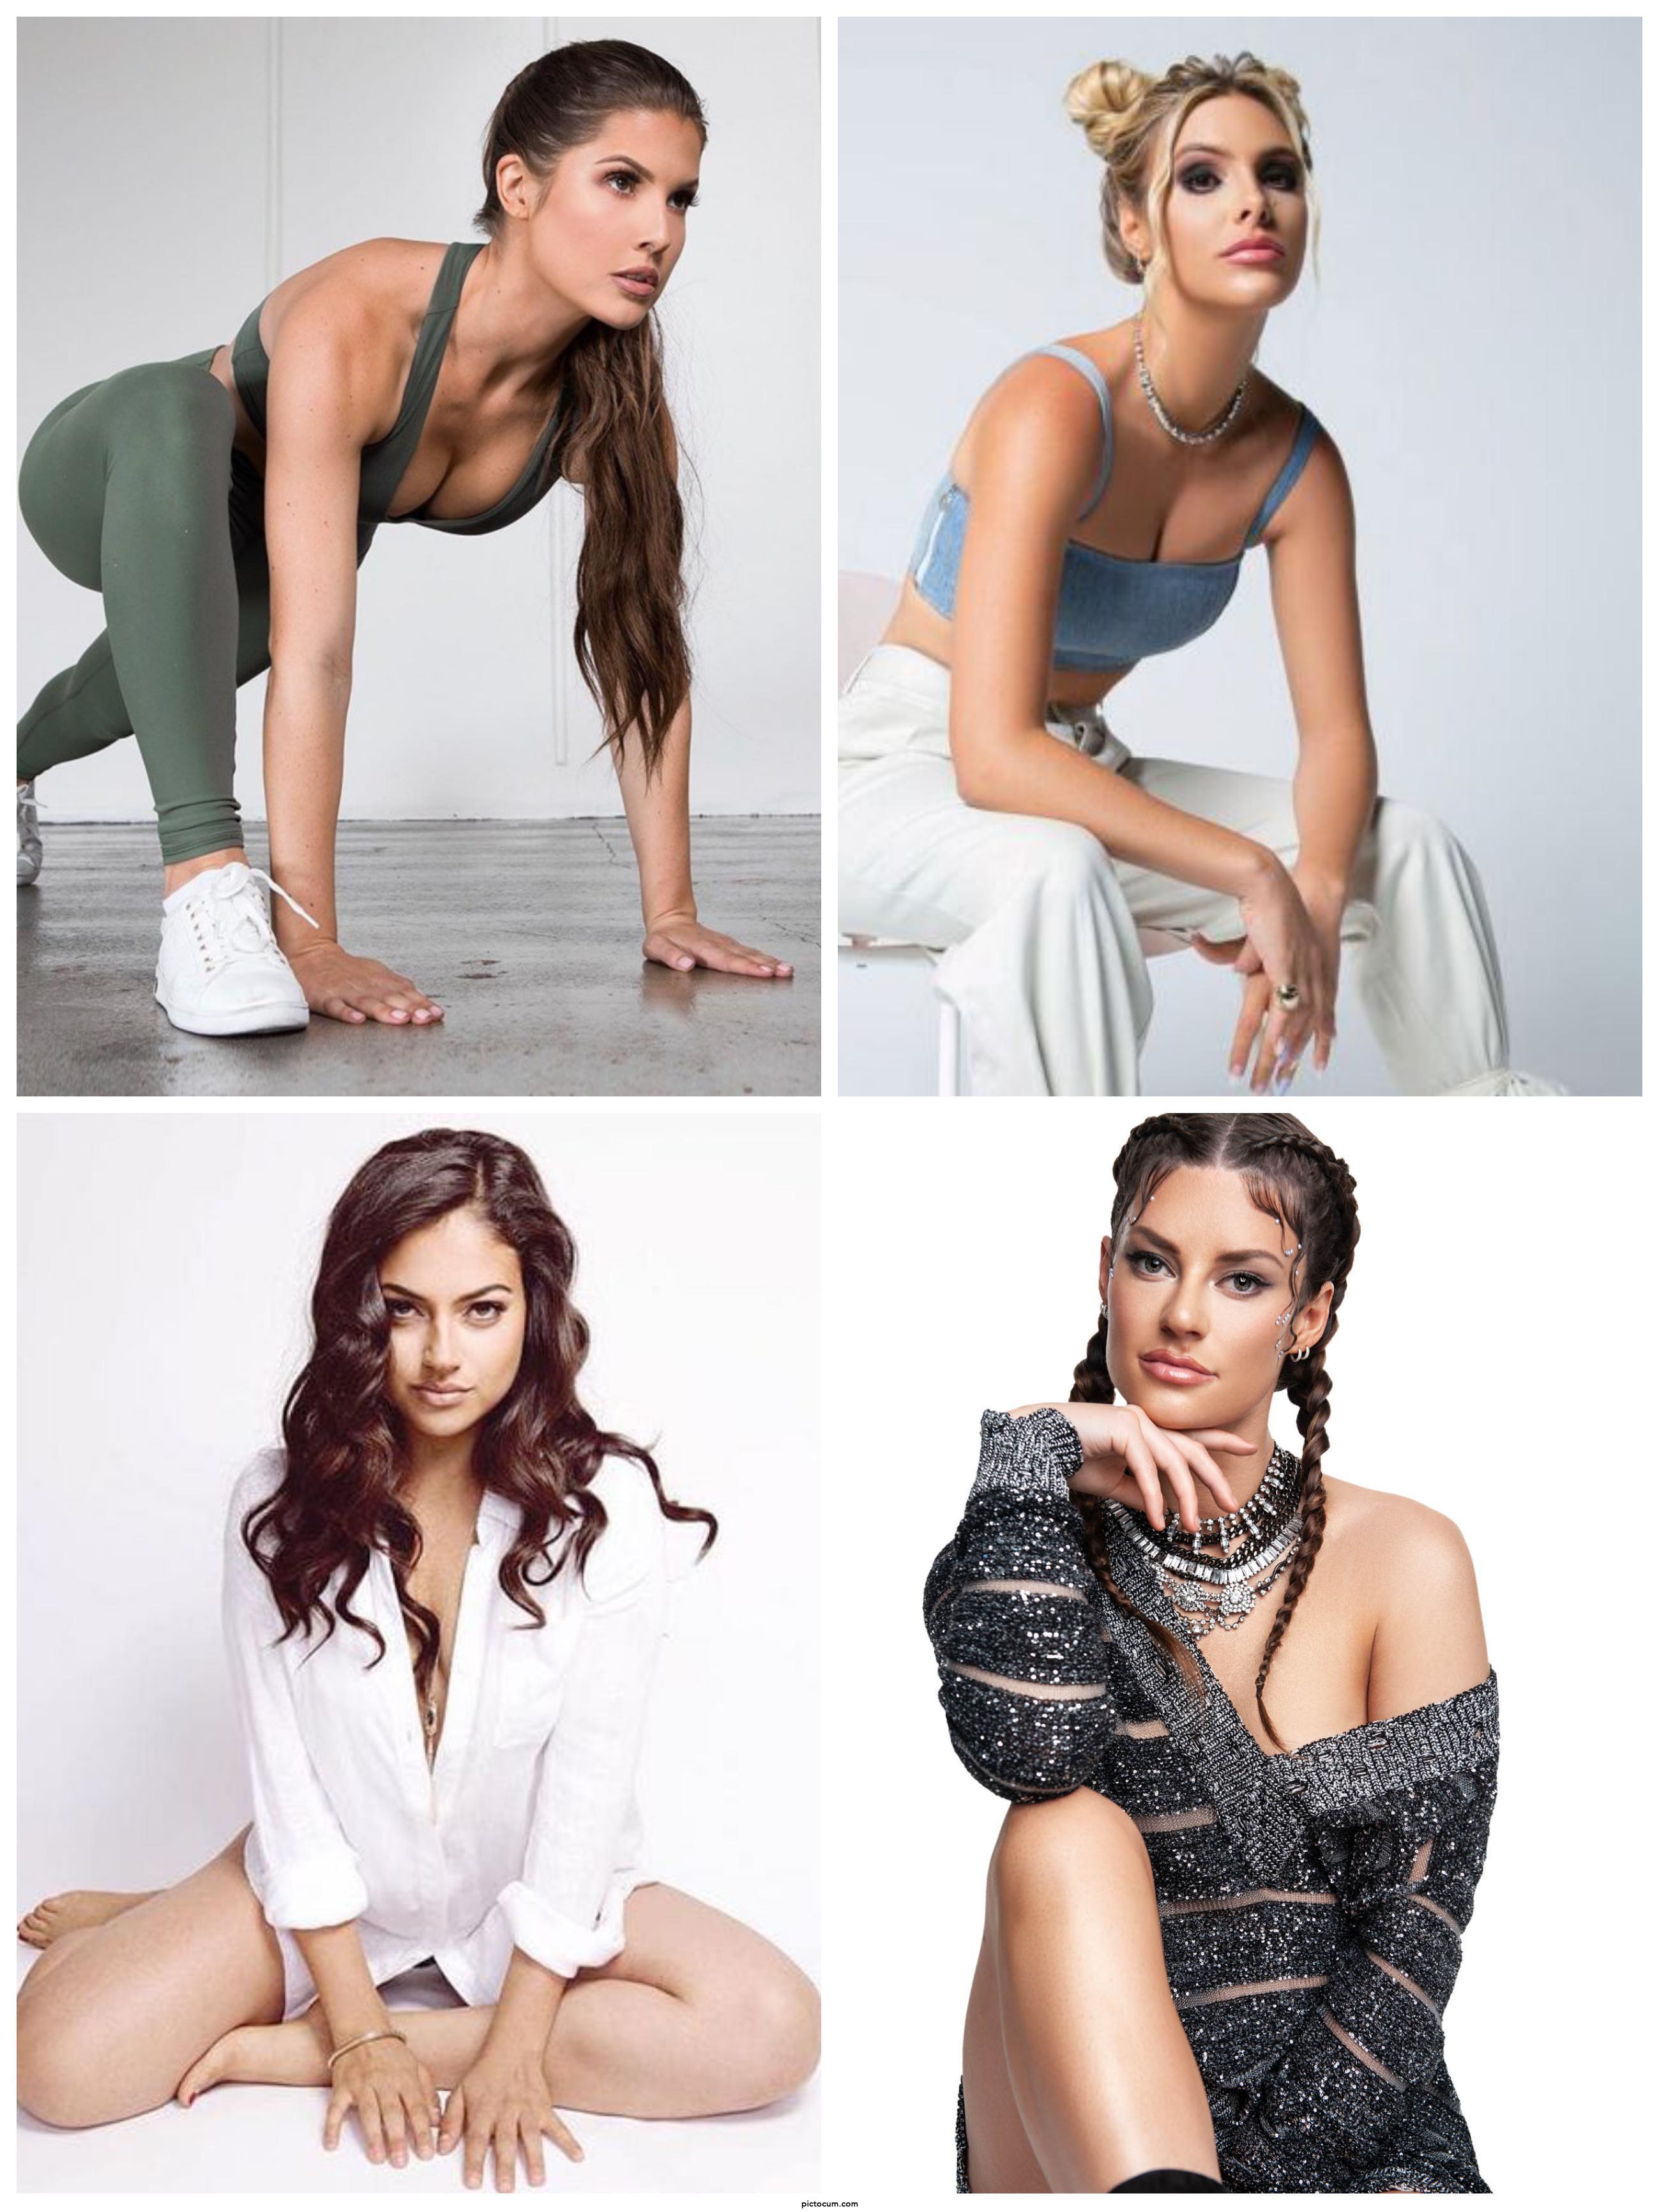 Amanda Cerny, Lele Pons, Inanna Starkis, and Hannah Stocking. Which do you want to 1) Fuck 2) Get a blowjob from 3) Get pegged by 4) Eat her pussy?